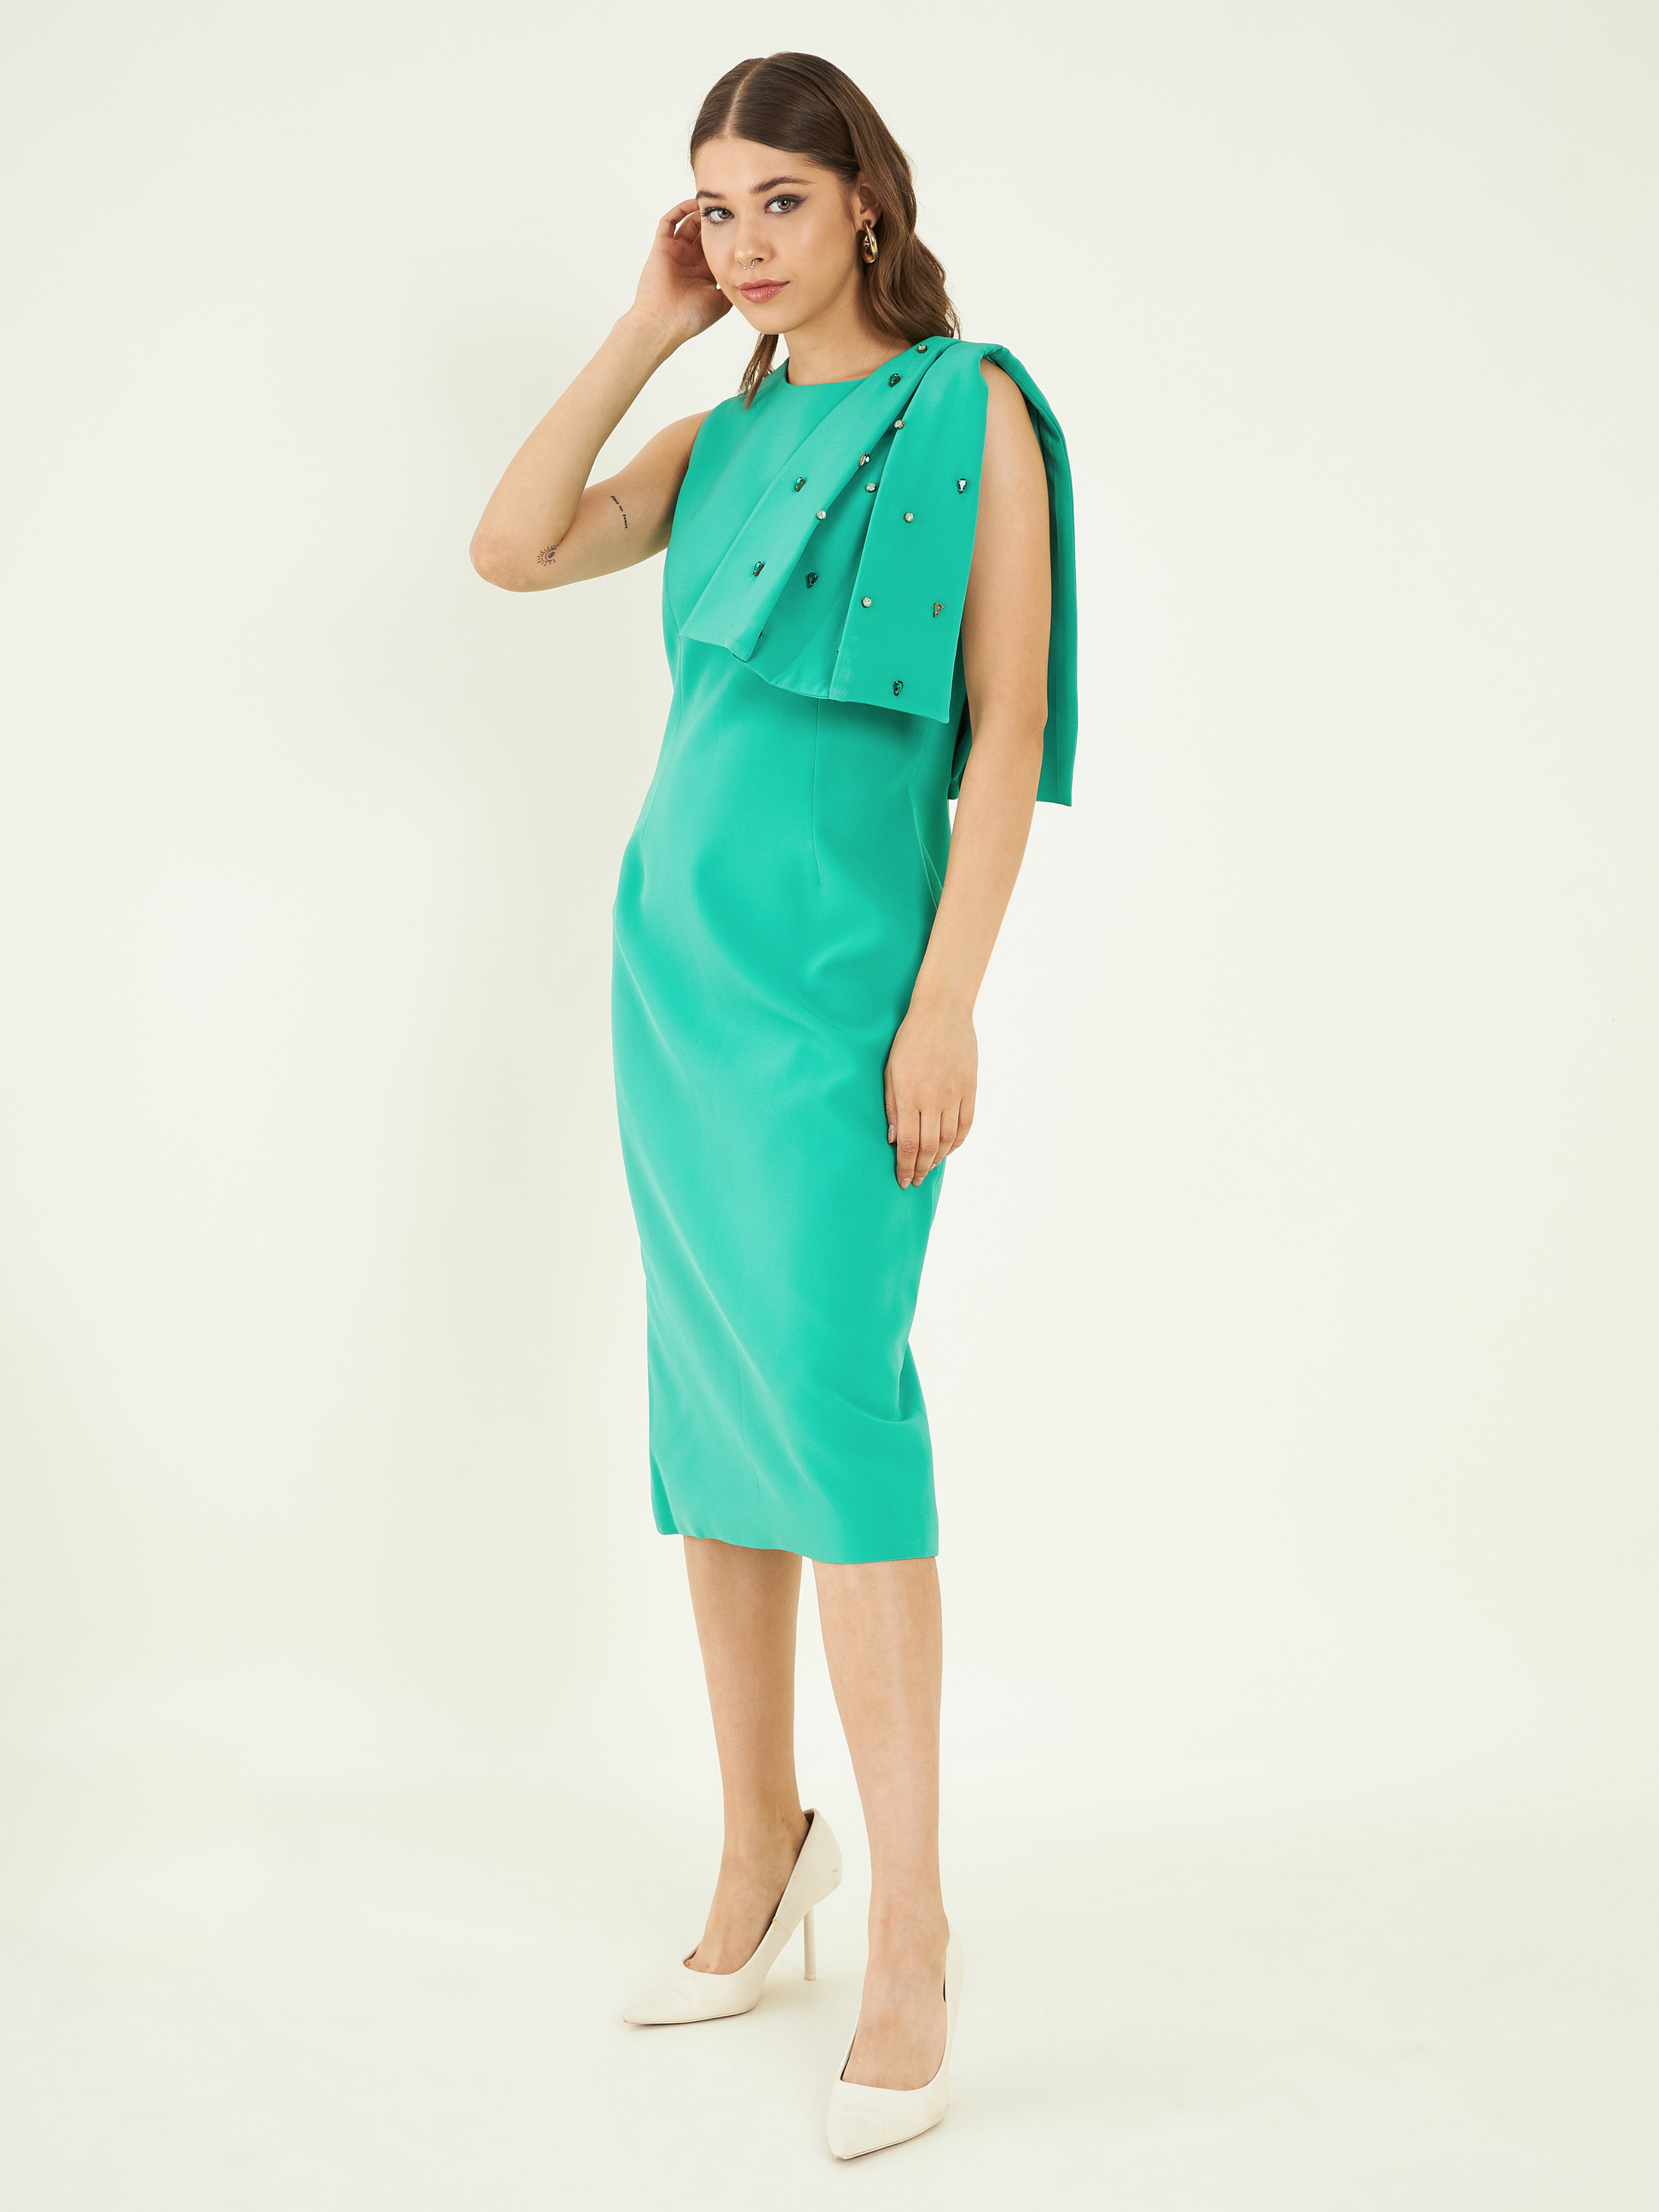 Turquoise Green Office Wear Dress at Kamakhyaa by Bohobi. This item is Fine Banana Crepe, Green, Office Wear, Regular Fit, Sleeveless Dresses, Solids, Toxin free